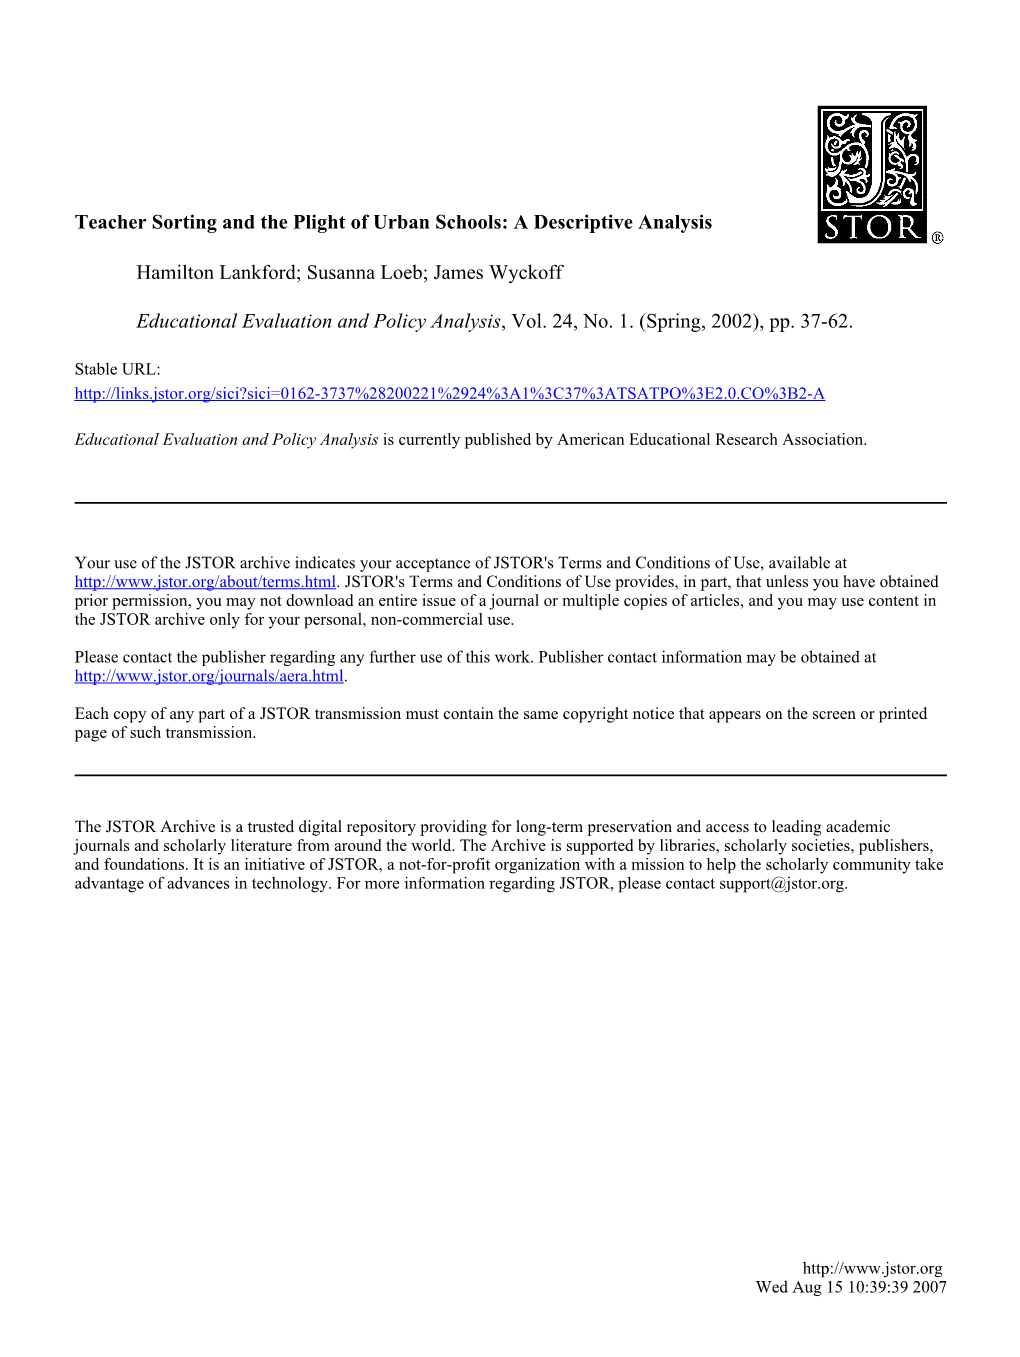 Teacher Sorting and the Plight of Urban Schools: a Descriptive Analysis Hamilton Lankford; Susanna Loeb; James Wyckoff Educational Evaluation and Policy Analysis, Vol